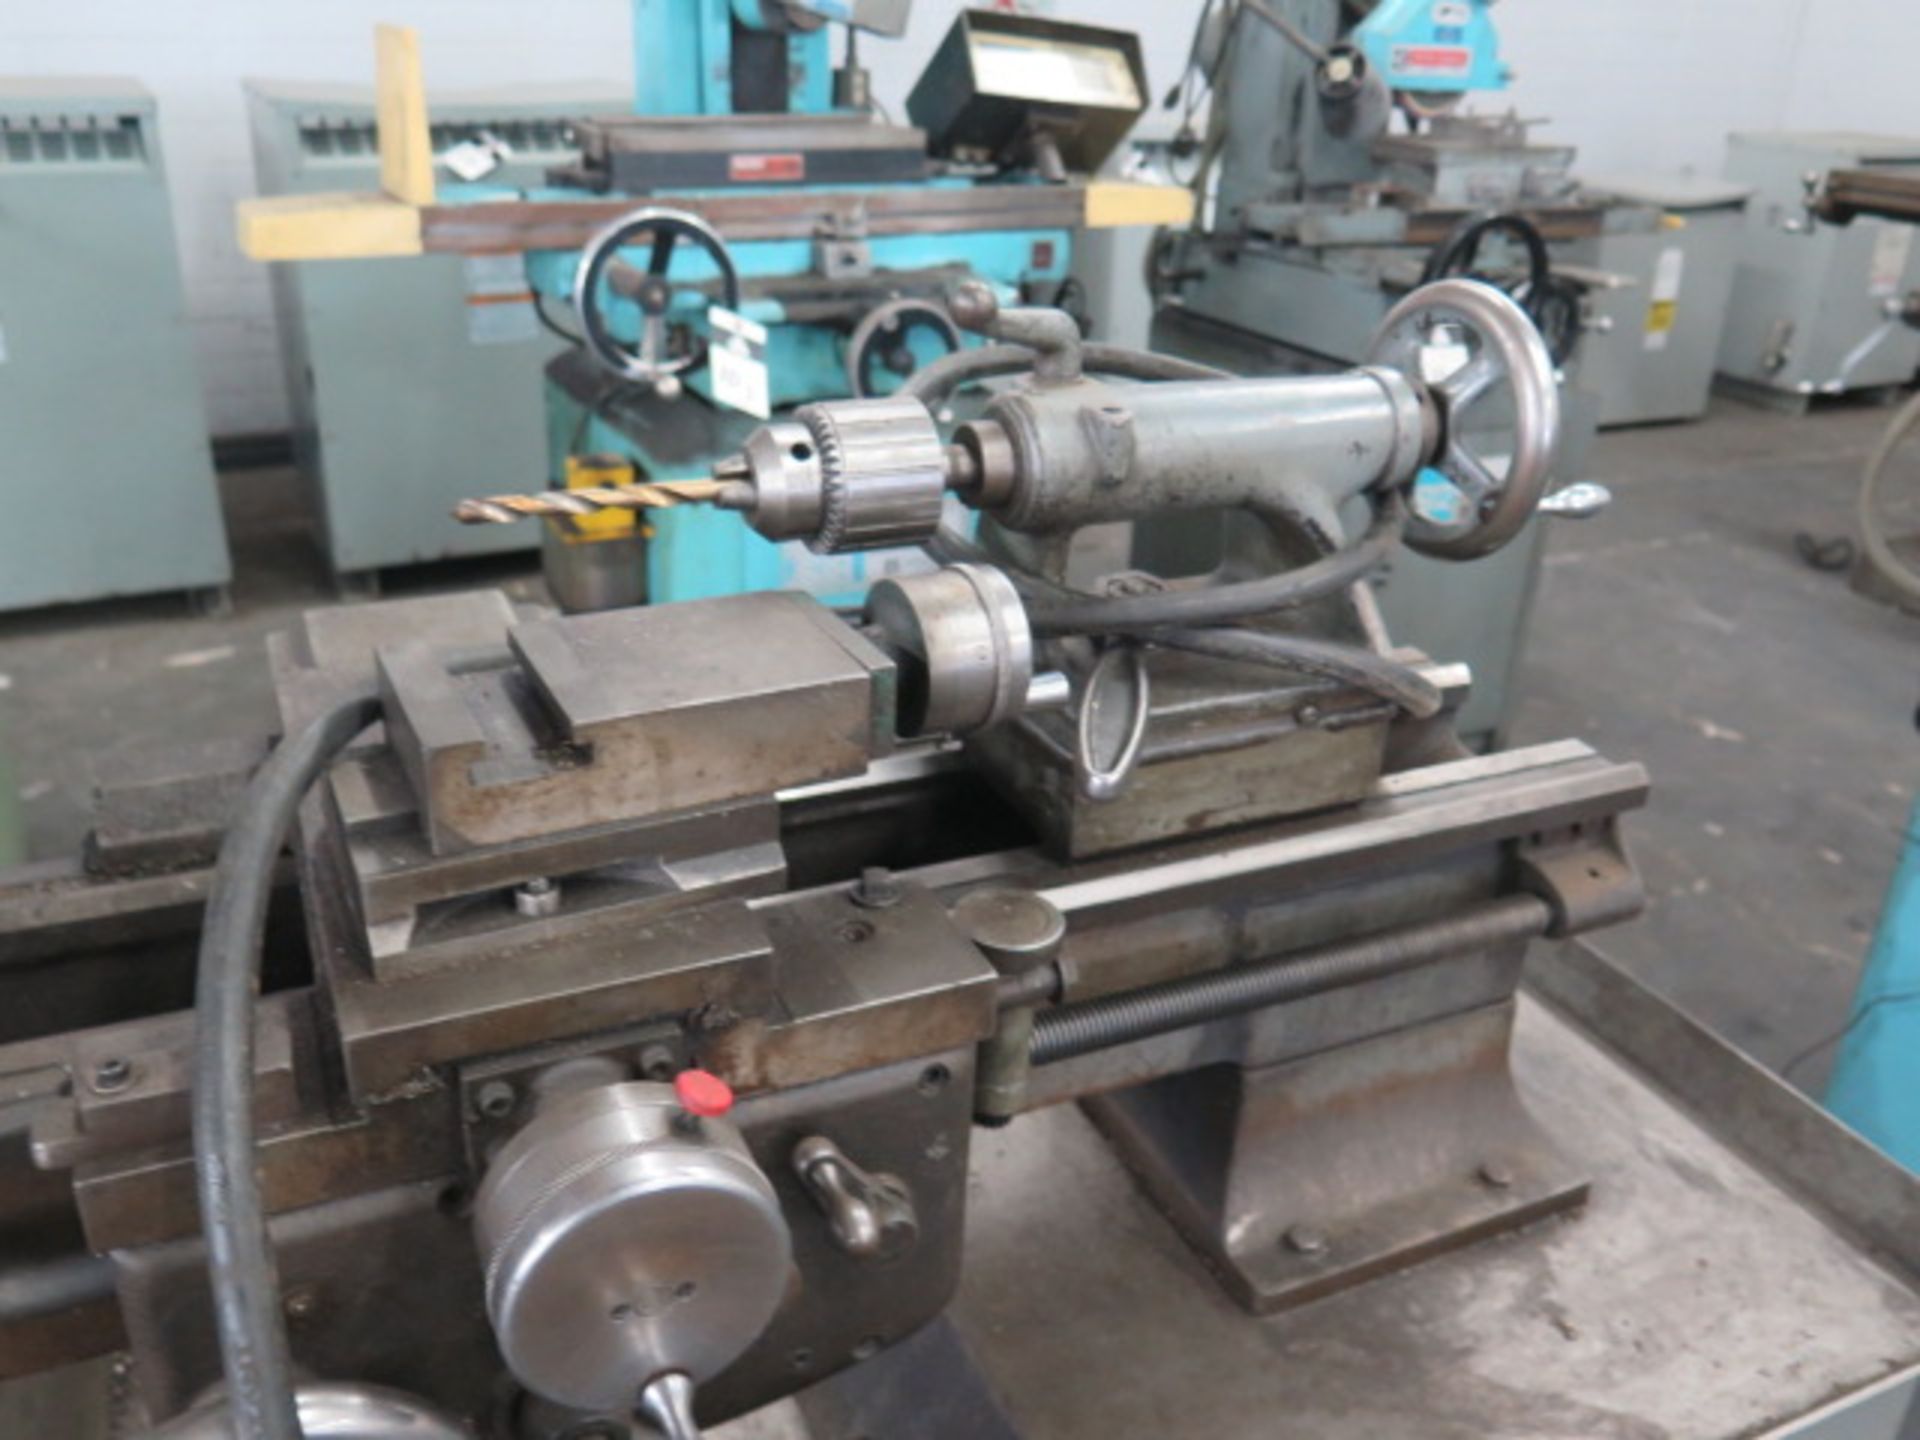 Logan mdl. 2535-2VH 12" x 24" Lathe s/n 83331 w/ 55-2000 Dial RPM, Inch Threading, Tailstock, 7 1/2" - Image 6 of 8